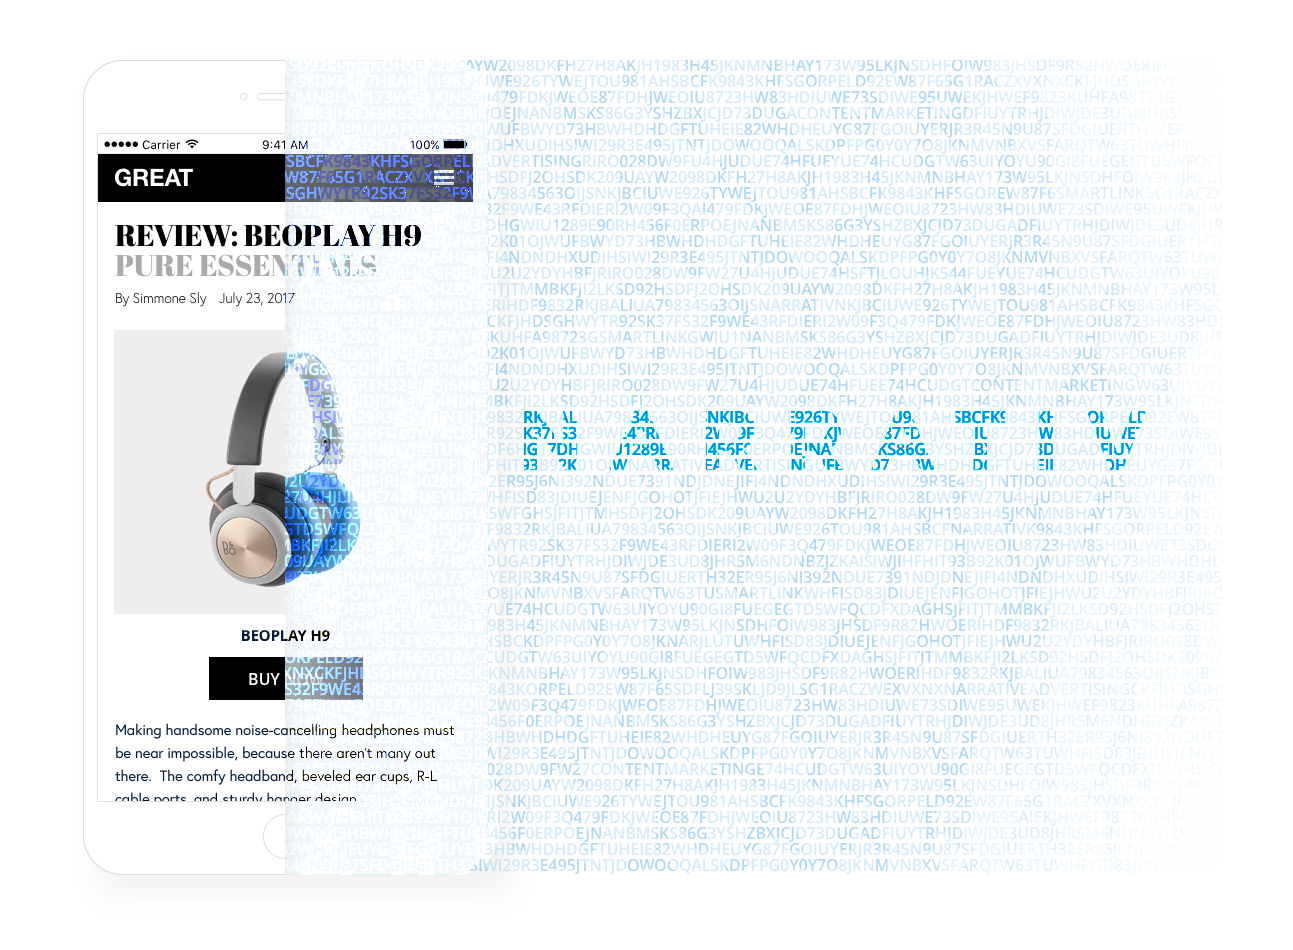 Narrativ helps publishers make more money when they drive sales